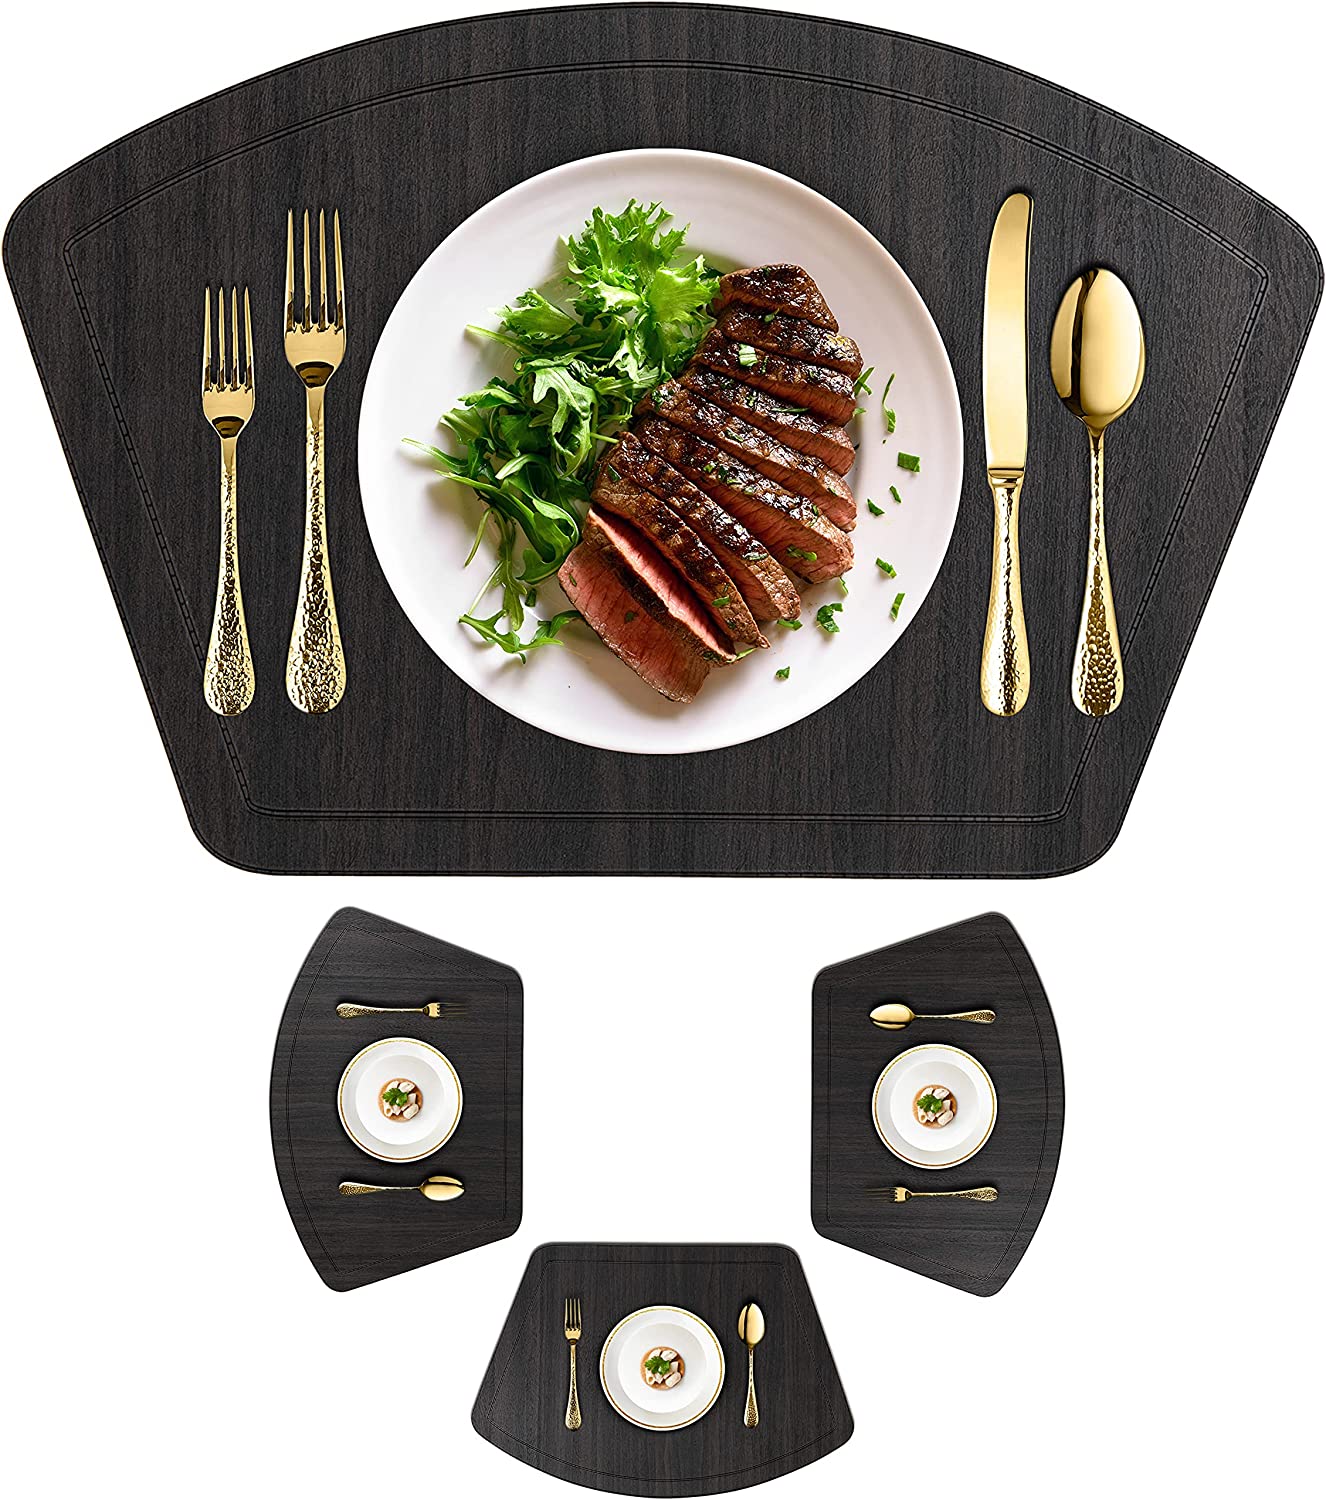 Finding the Perfect Placemats for Your Home